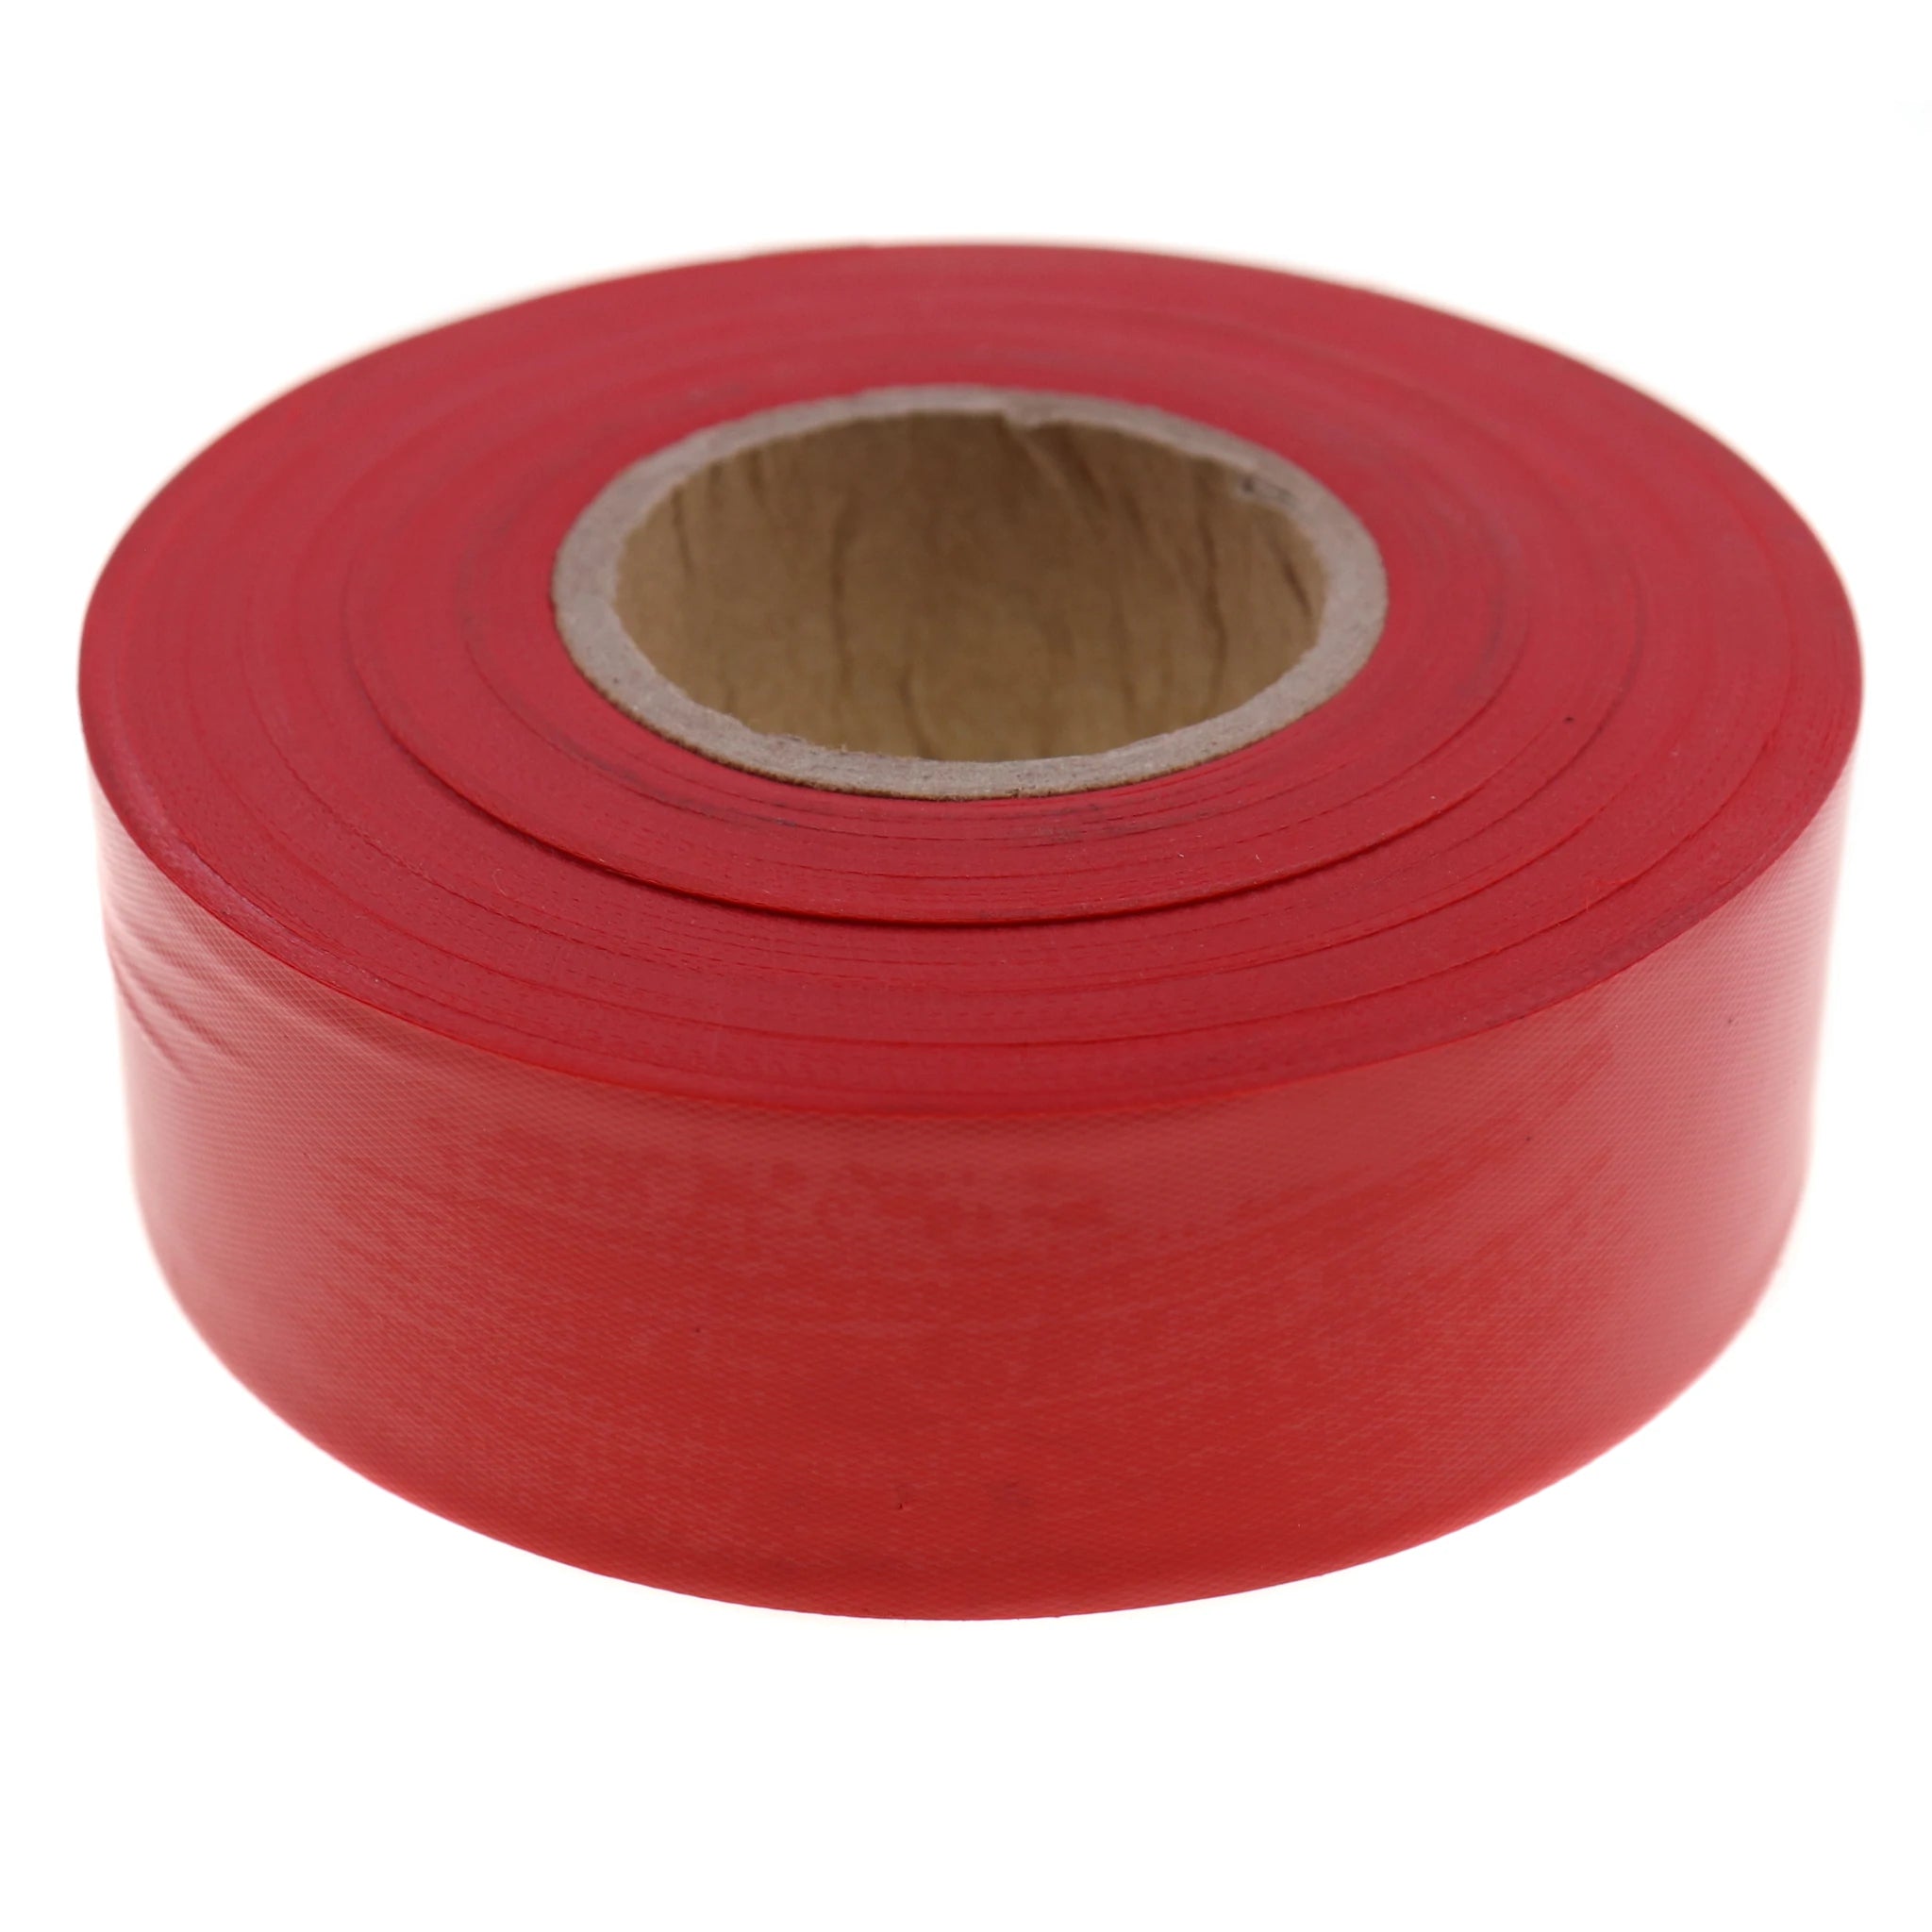 Irwin, Irwin Flagging Tapes, Red, 1-3/16" X 300'